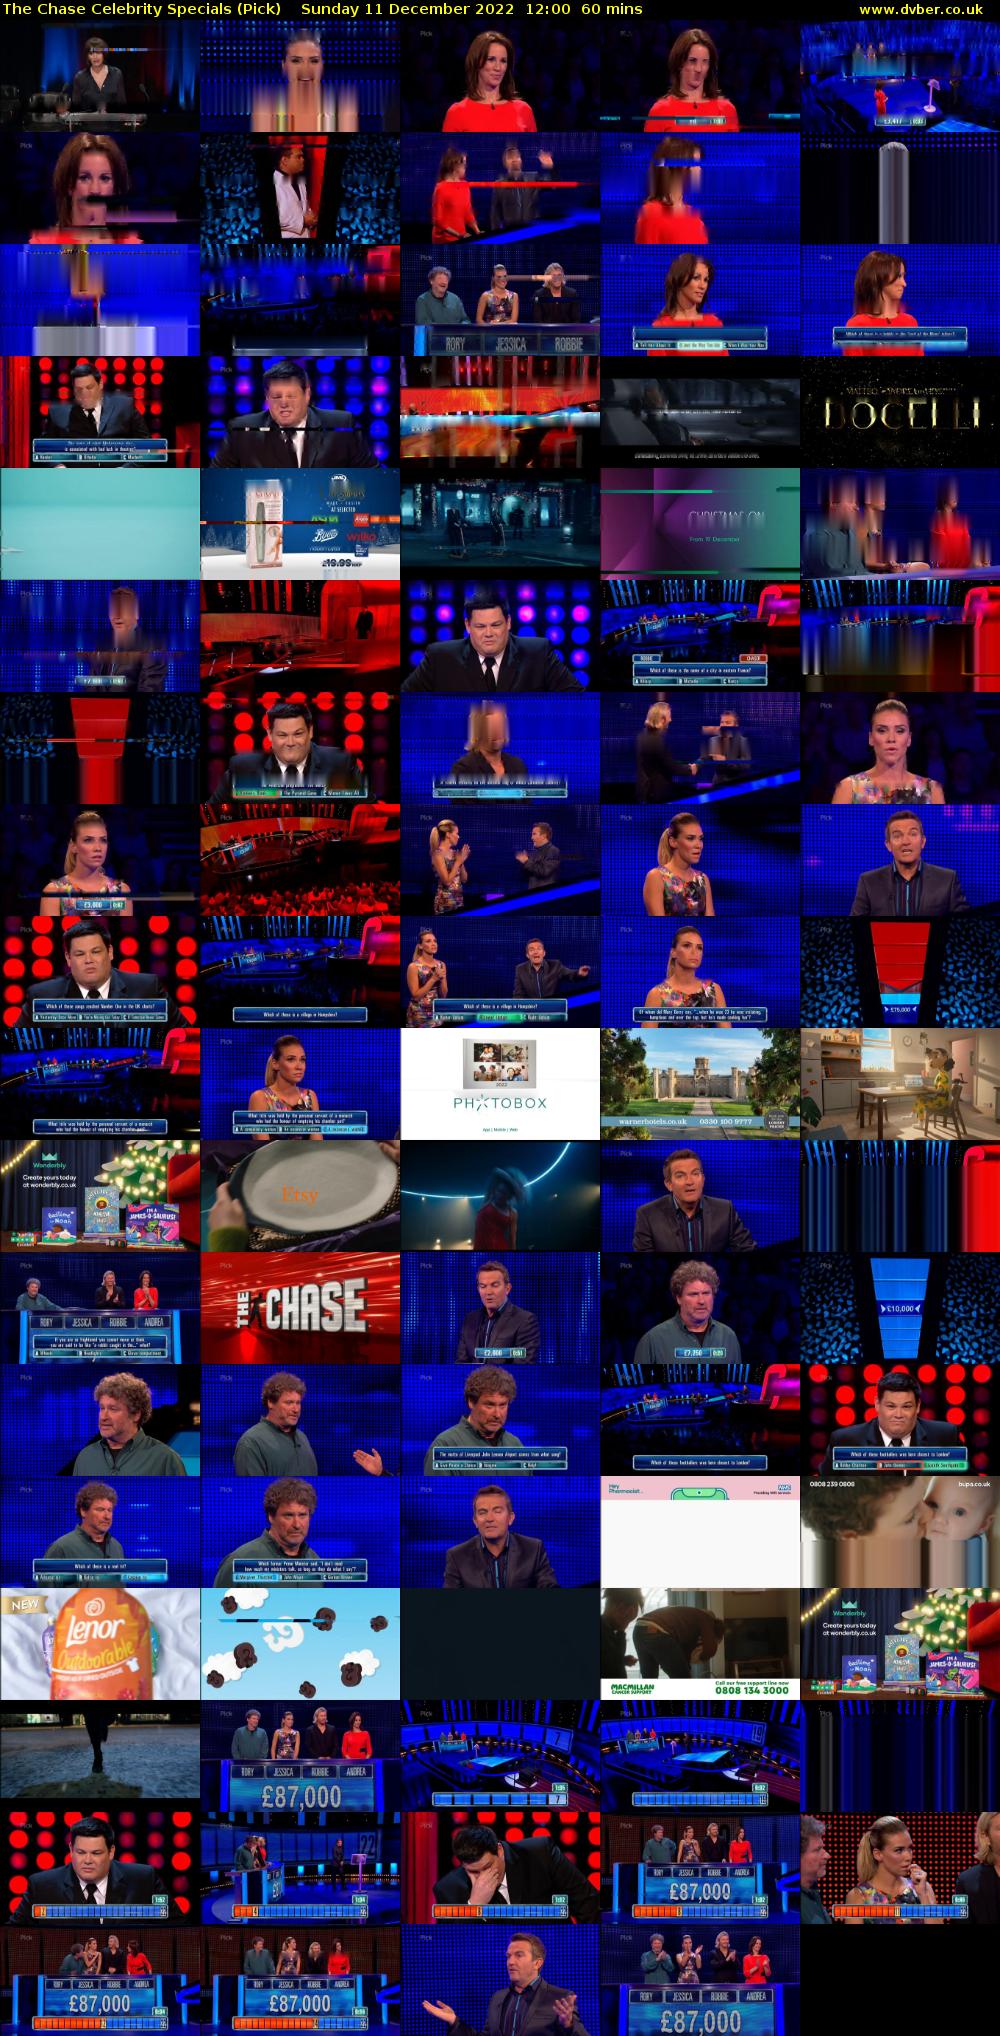 The Chase Celebrity Specials (Pick) Sunday 11 December 2022 12:00 - 13:00